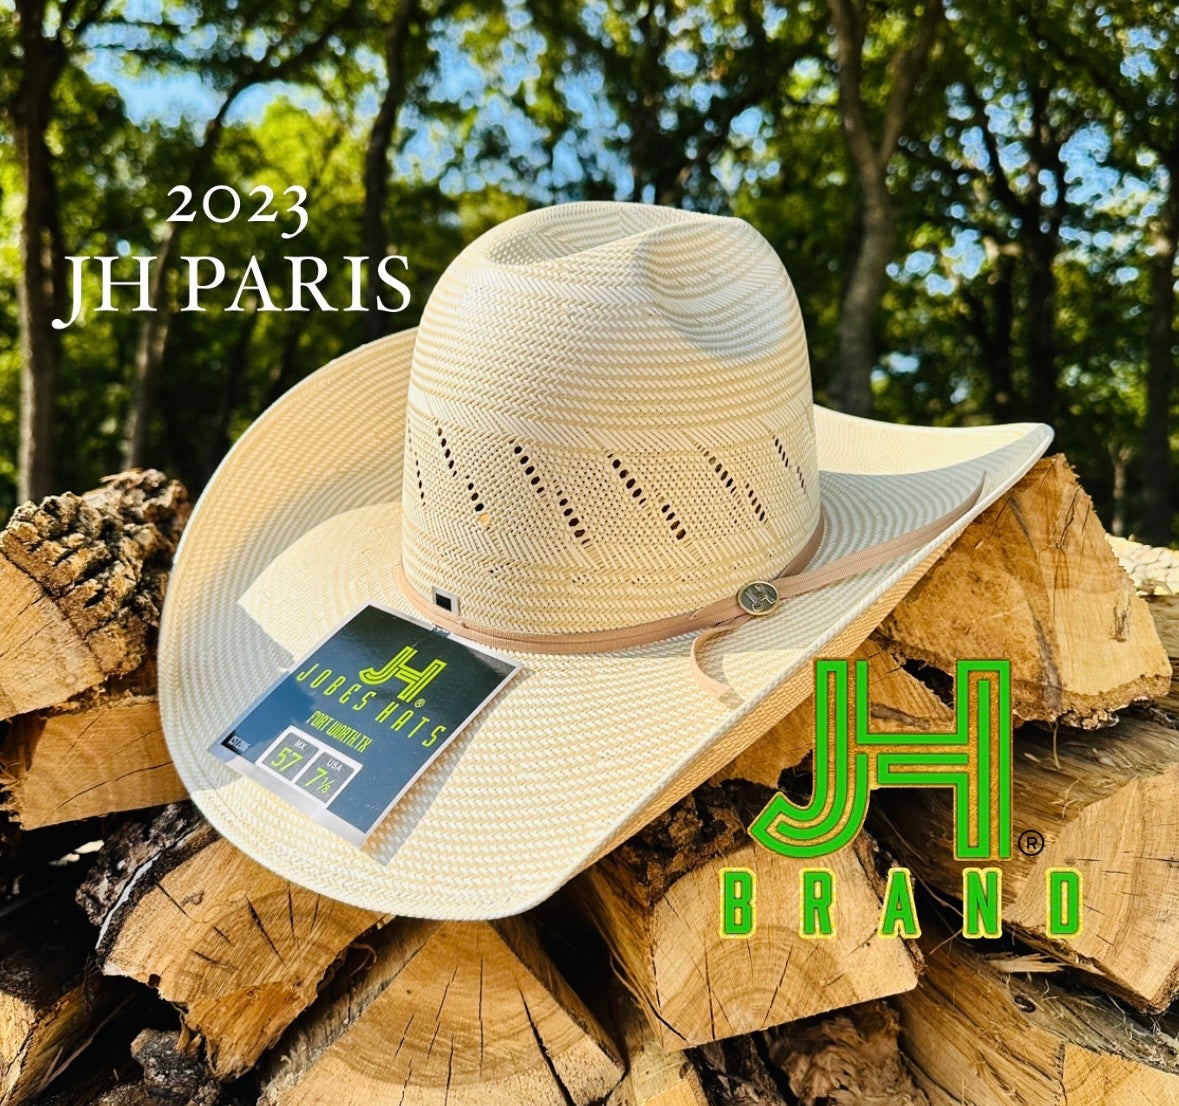 2022 Jobes Hats Straw Hat “Fashion” 4” Brim (Comes open and flat)